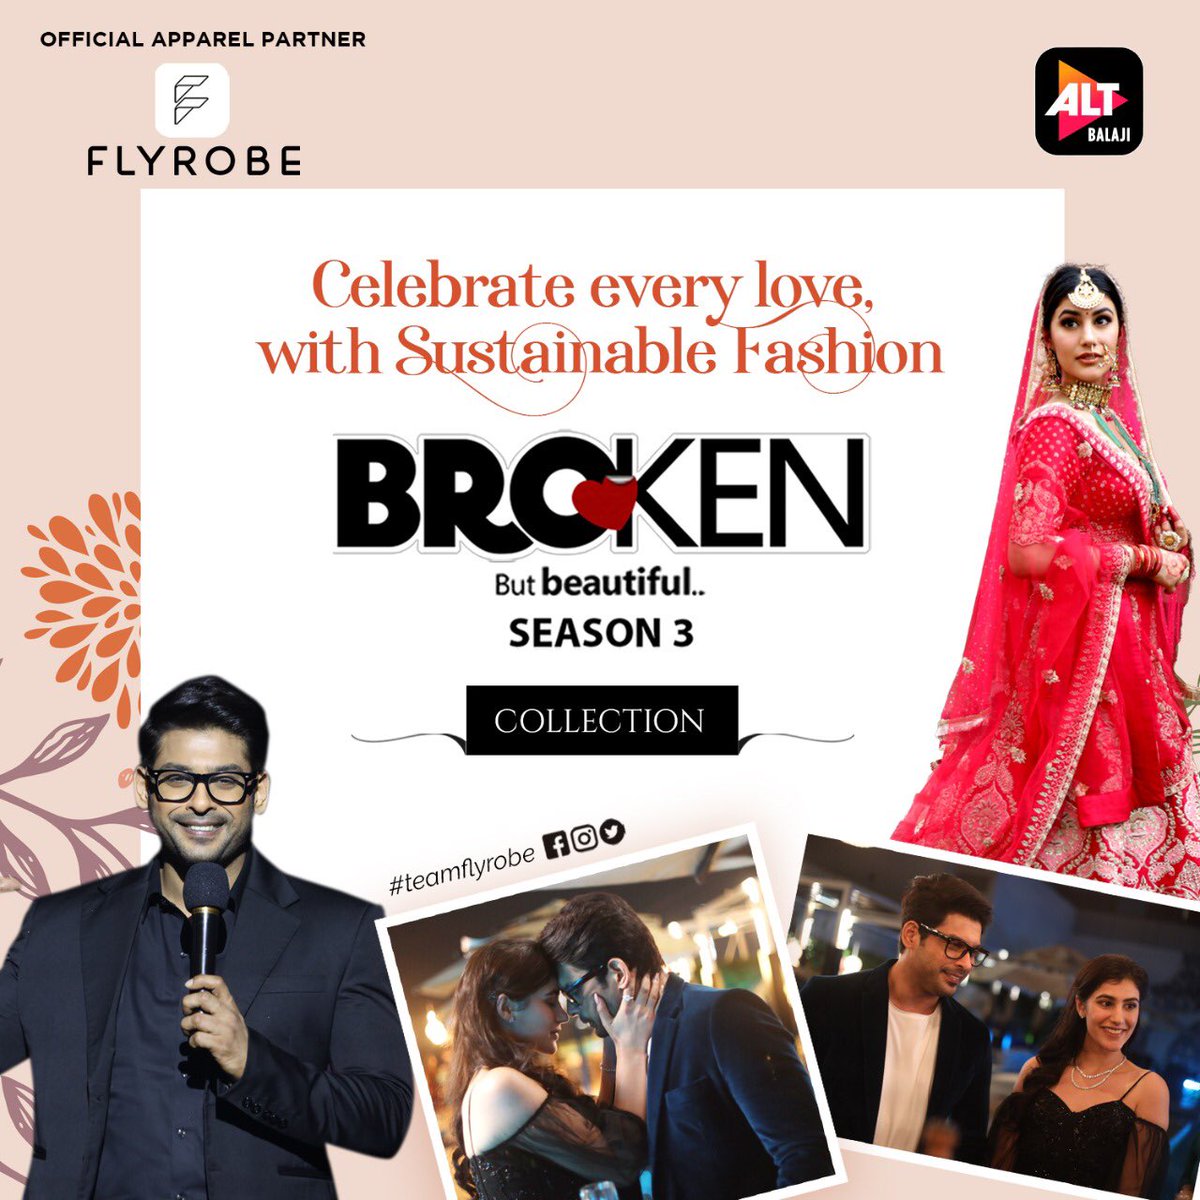 You may be broken, but Flyrobe will make you beautiful. You can rent any outfit that catches your eye and makes you feel a little less broken. Flyrobe is proud to announce the new ‘BROKEN BUT BEAUTIFUL’ collection.”
@altbalaji @ektarkapoor @sidharth_shukla #soniarathi #ehanbhat